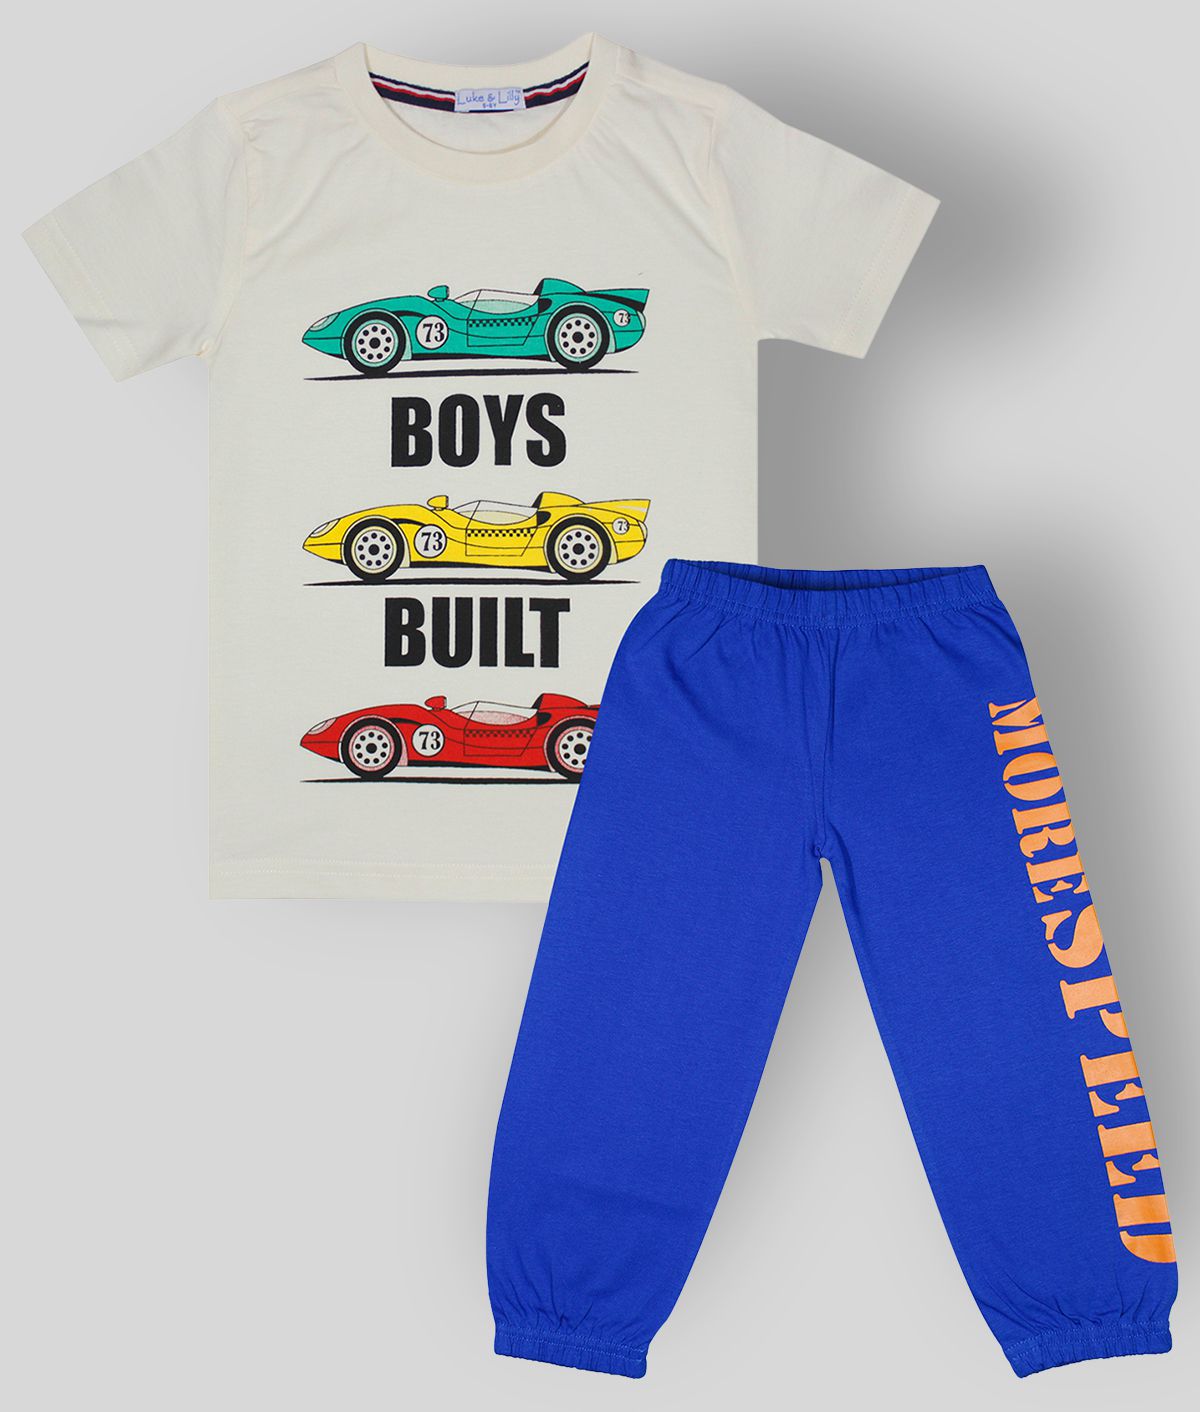     			Luke and Lilly - Multi Cotton Boy's T-Shirt & Pants ( Pack of 1 )